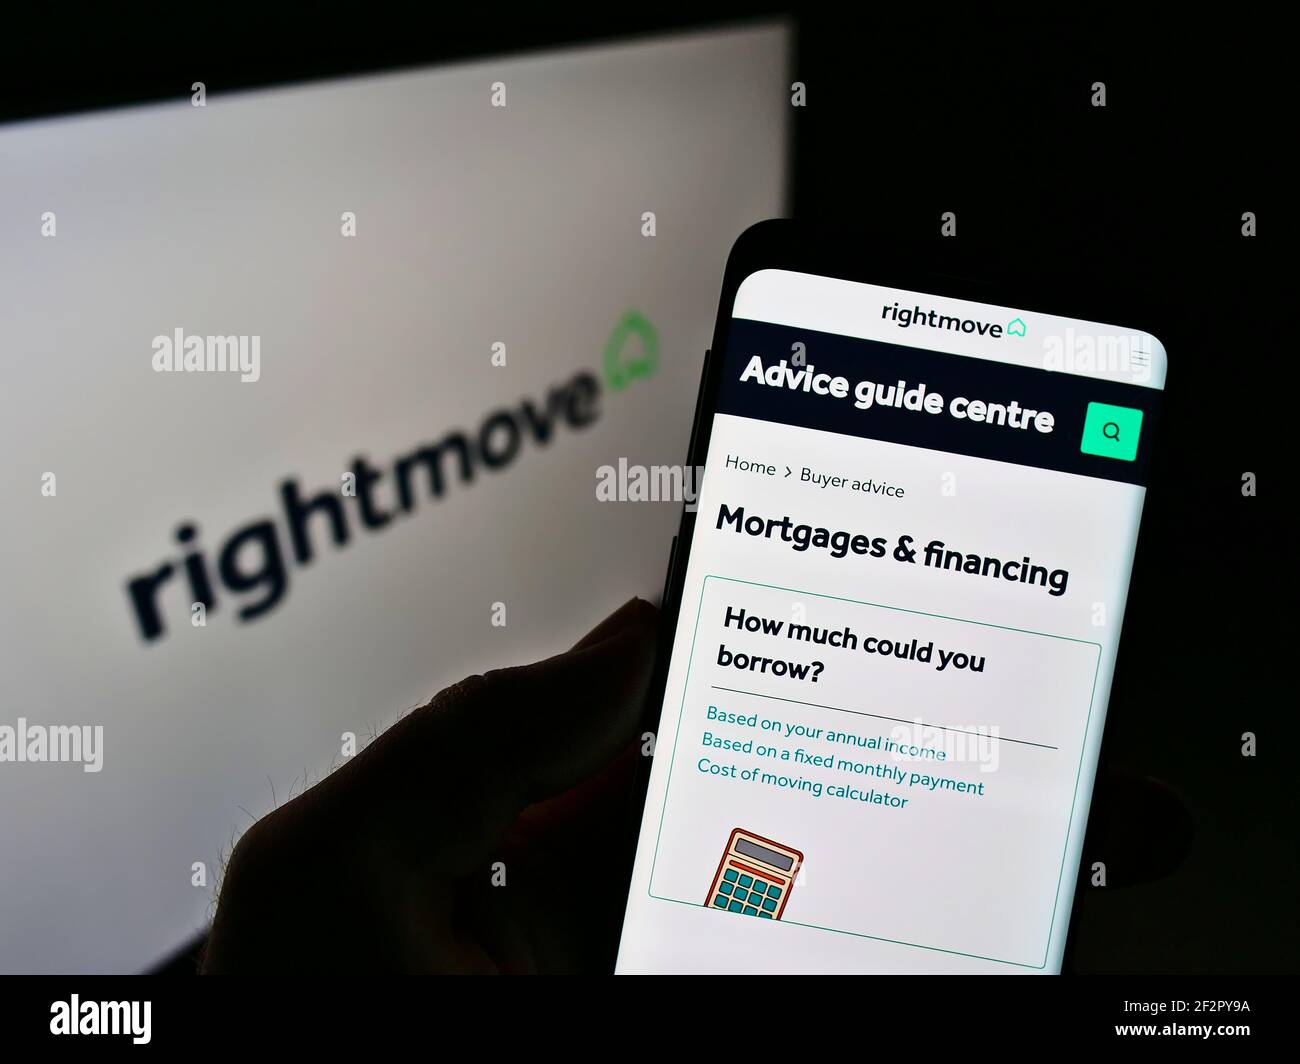 Person holding cellphone with website of British real estate online portal Rightmove plc on screen in front of logo. Focus on center of phone display. Stock Photo